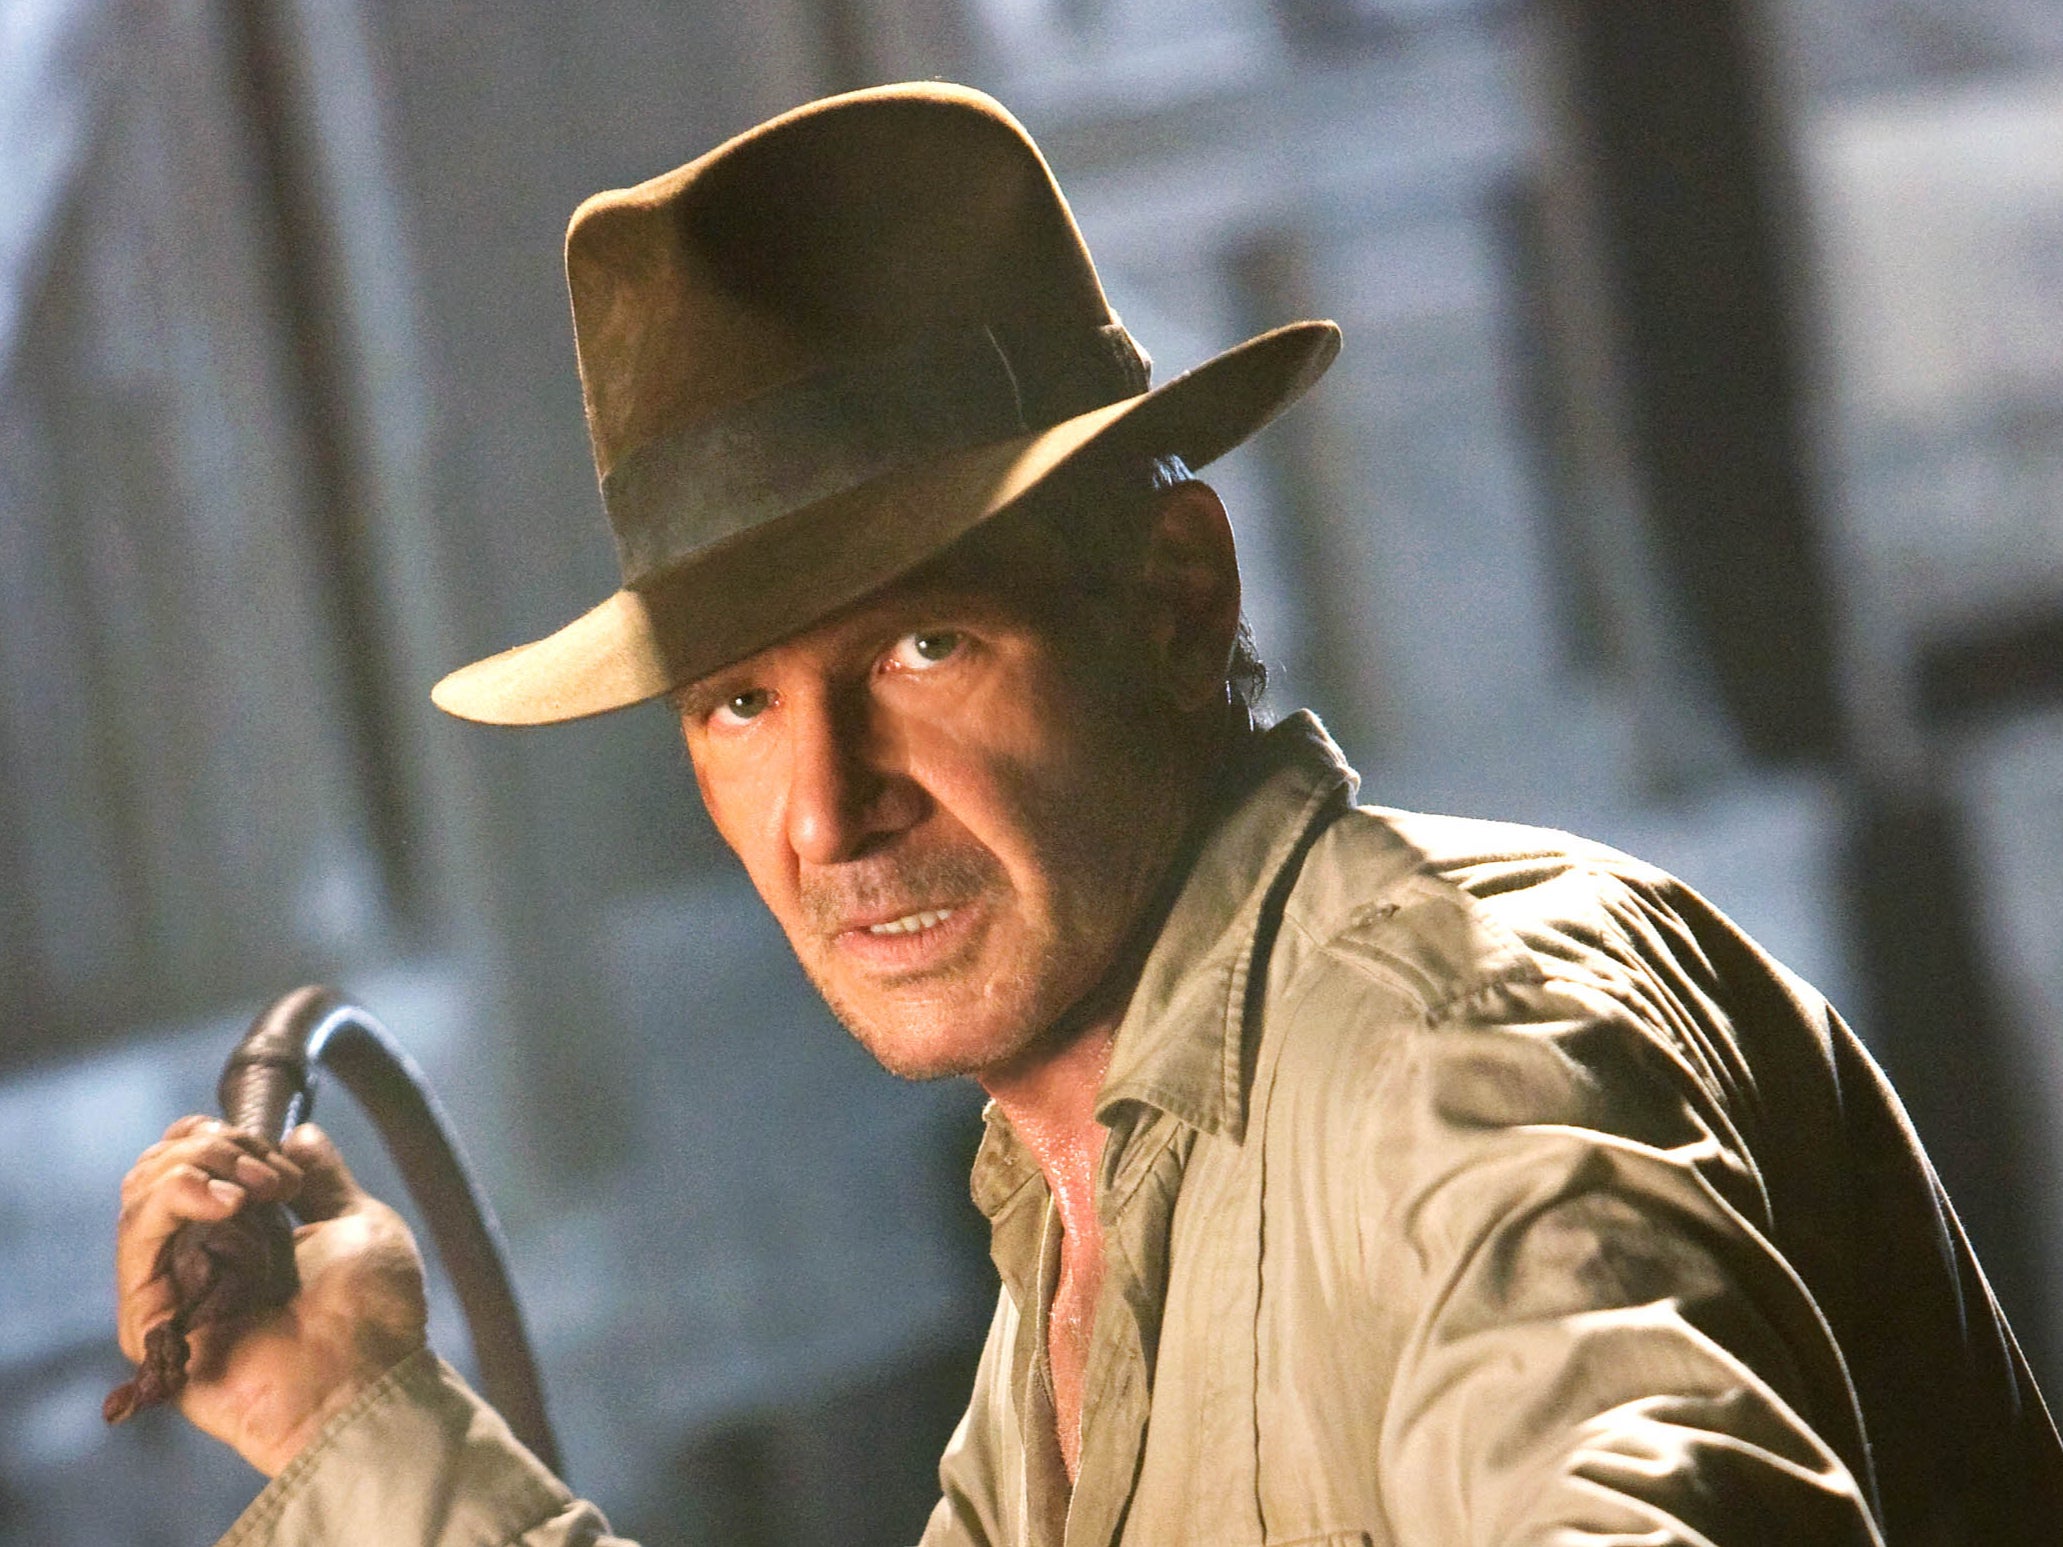 Indiana Jones 5 to feature digitally de-aged Harrison Ford | The Independent